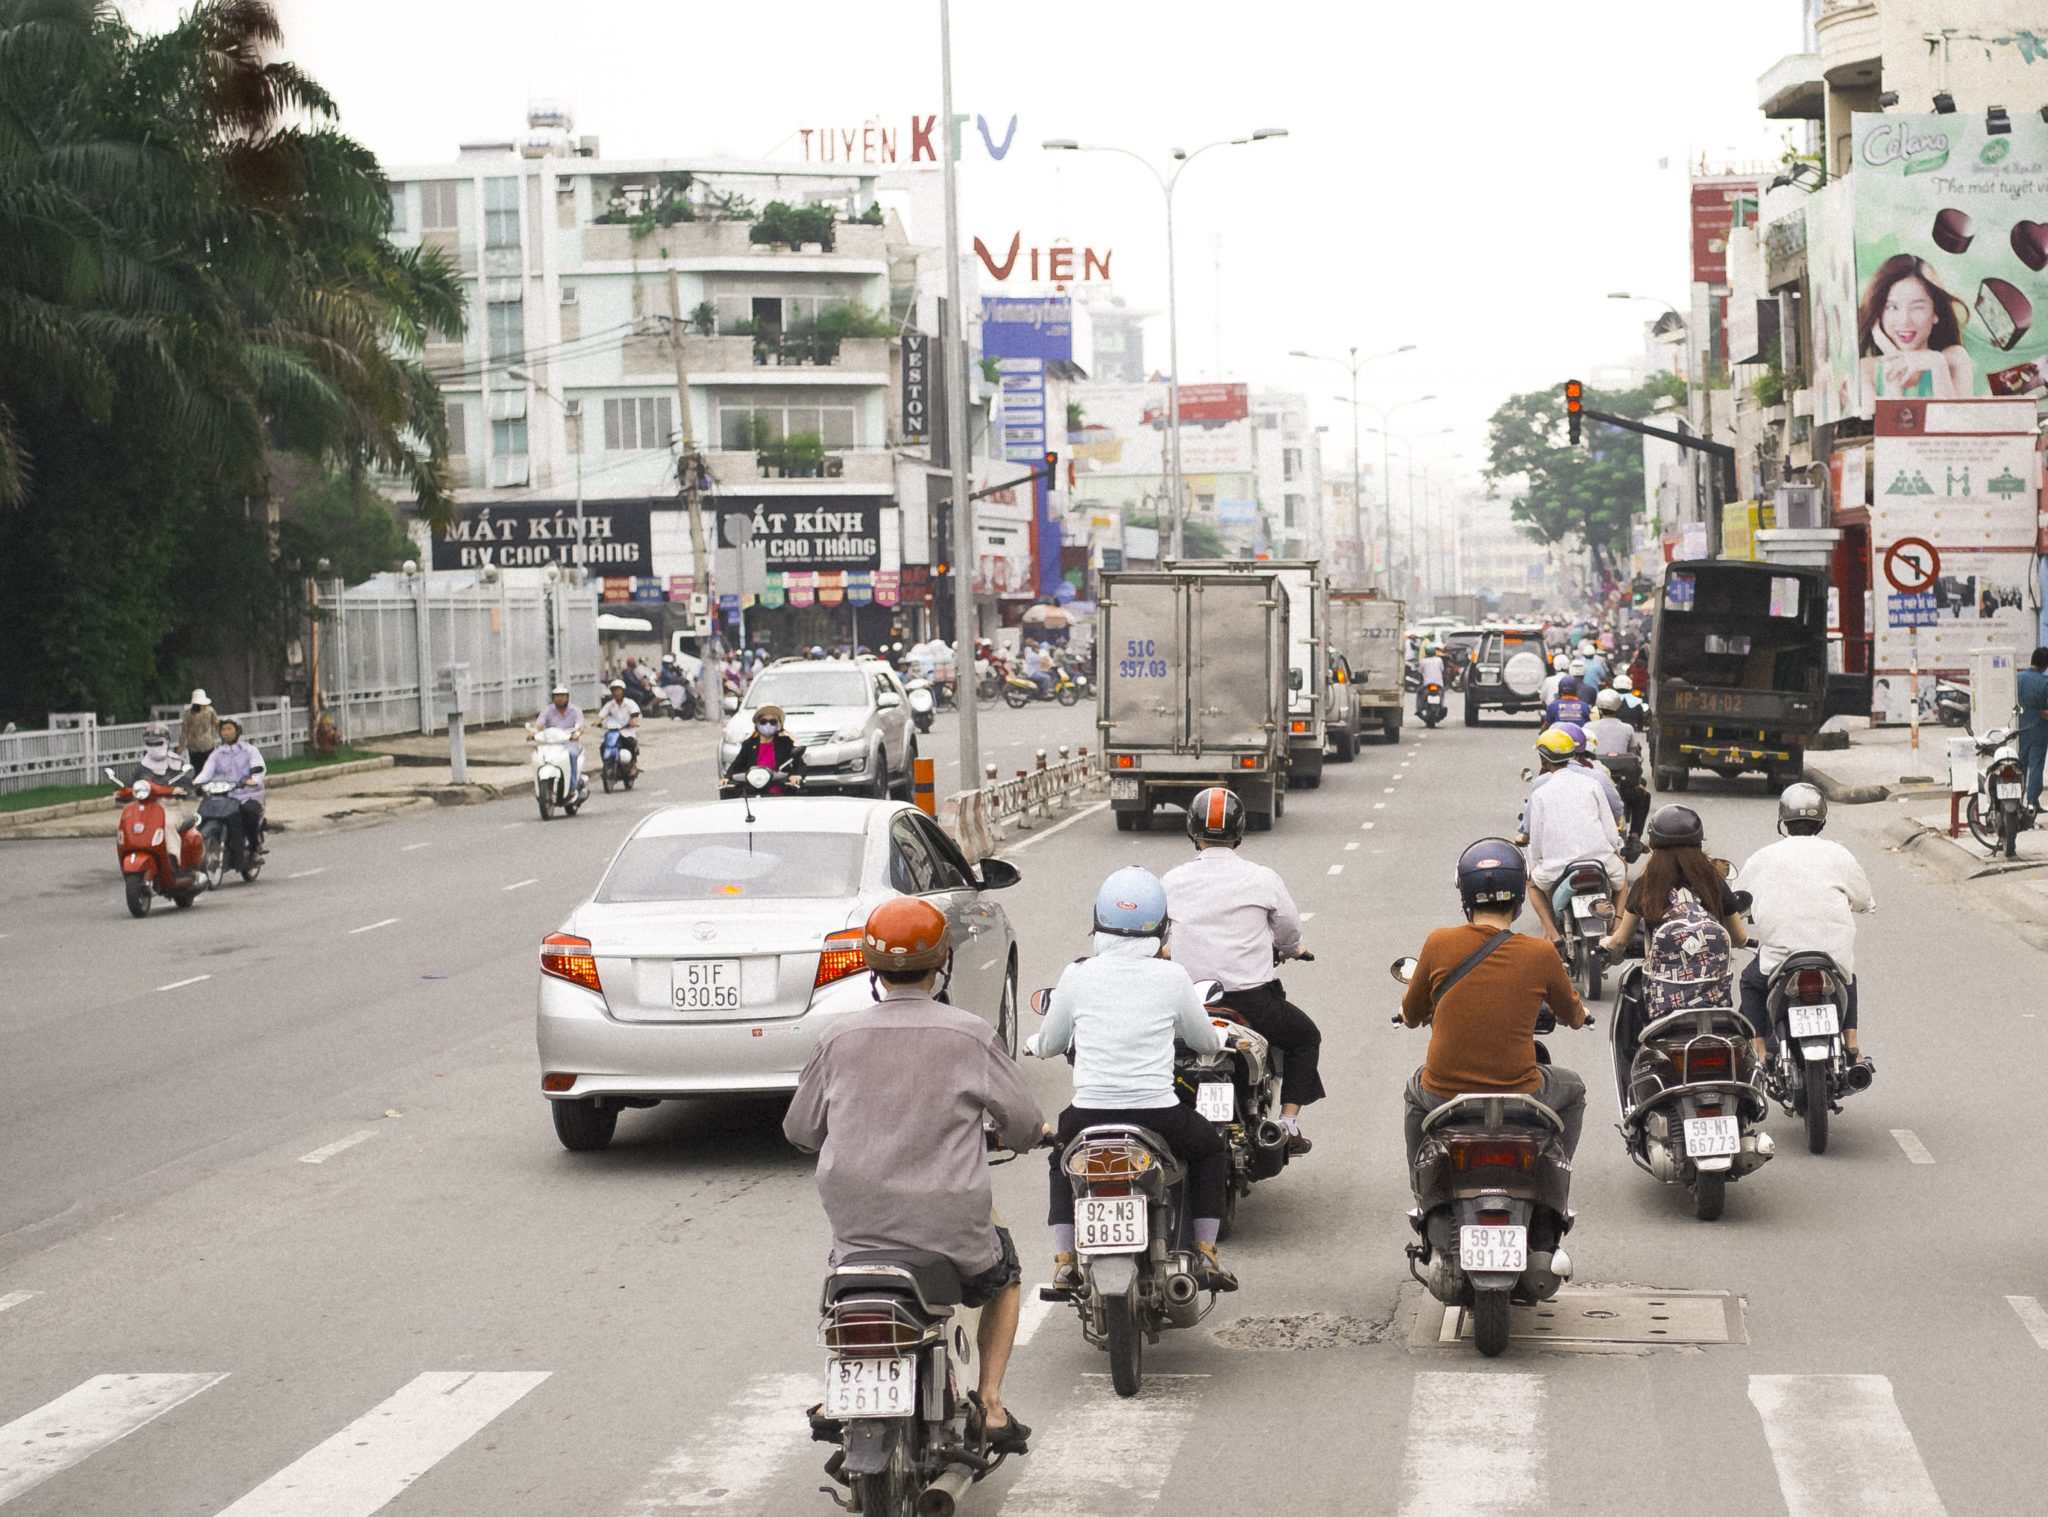 How to understand Vietnam's fading free trade hopes